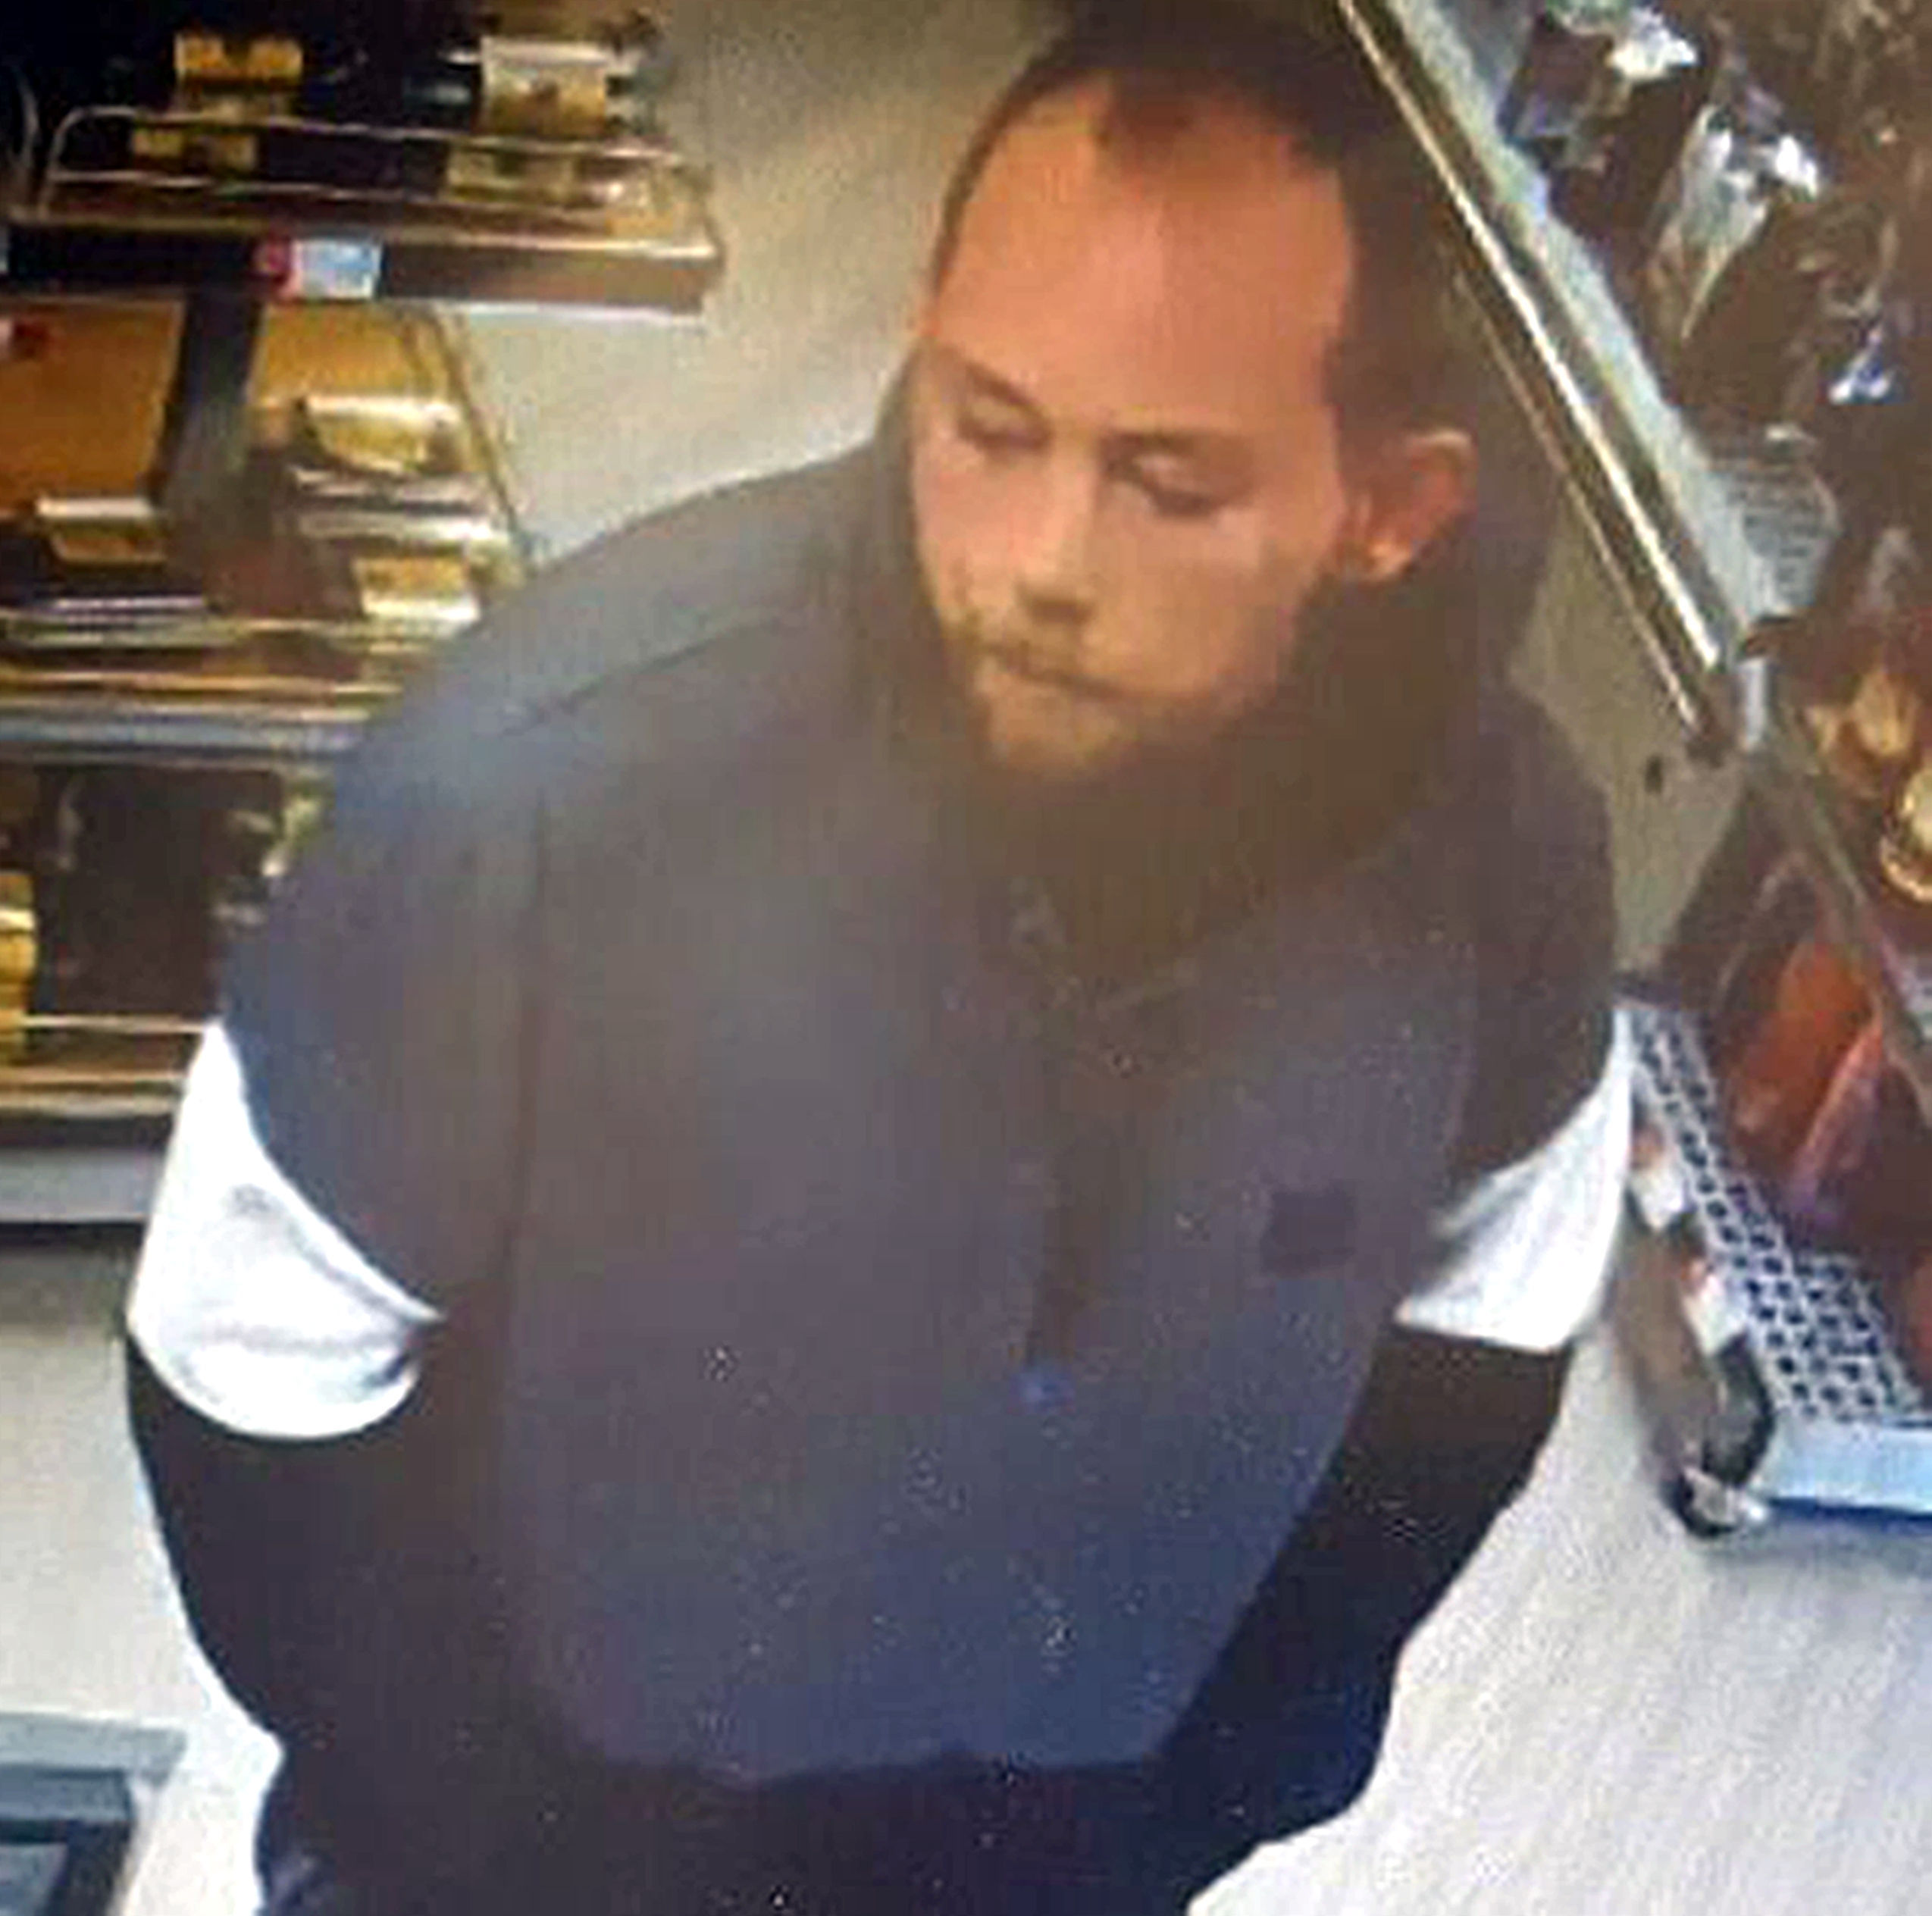 John Tomlin in a shop while trying to evade police (Metropolitan Police/PA)